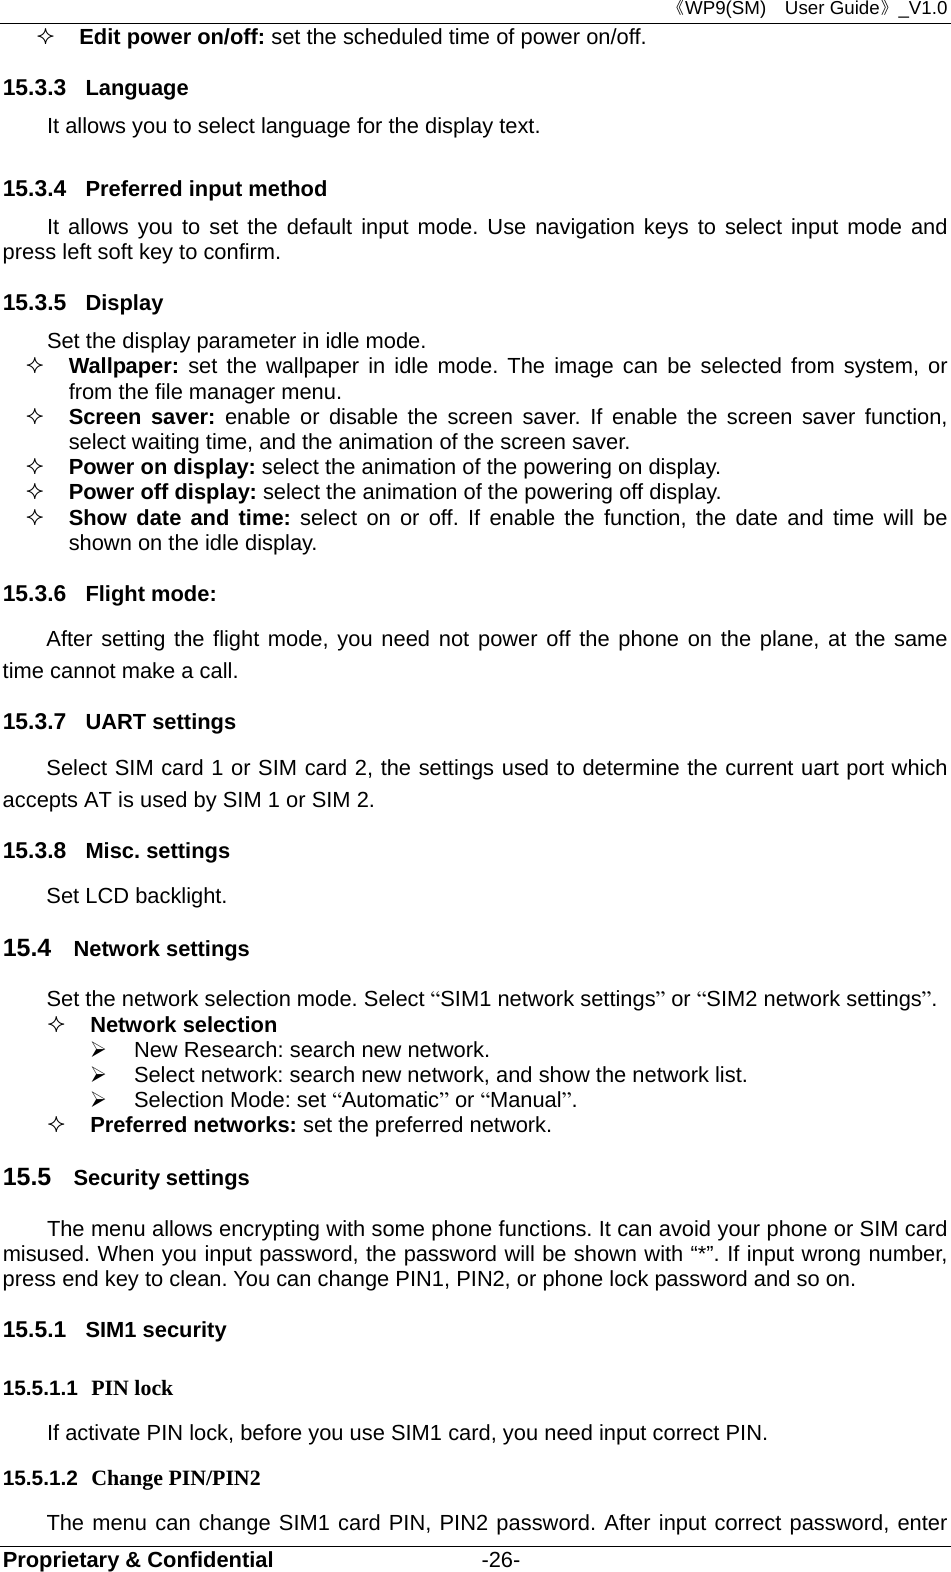 《WP9(SM)  User Guide》_V1.0 Proprietary &amp; Confidential                   -26-  Edit power on/off: set the scheduled time of power on/off. 15.3.3  Language It allows you to select language for the display text. 15.3.4  Preferred input method It allows you to set the default input mode. Use navigation keys to select input mode and press left soft key to confirm. 15.3.5  Display Set the display parameter in idle mode.  Wallpaper: set the wallpaper in idle mode. The image can be selected from system, or from the file manager menu.  Screen saver: enable or disable the screen saver. If enable the screen saver function, select waiting time, and the animation of the screen saver.  Power on display: select the animation of the powering on display.  Power off display: select the animation of the powering off display.  Show date and time: select on or off. If enable the function, the date and time will be shown on the idle display. 15.3.6  Flight mode:   After setting the flight mode, you need not power off the phone on the plane, at the same time cannot make a call. 15.3.7  UART settings Select SIM card 1 or SIM card 2, the settings used to determine the current uart port which accepts AT is used by SIM 1 or SIM 2. 15.3.8  Misc. settings Set LCD backlight. 15.4  Network settings Set the network selection mode. Select “SIM1 network settings” or “SIM2 network settings”.  Network selection     New Research: search new network.   Select network: search new network, and show the network list.     Selection Mode: set “Automatic” or “Manual”.   Preferred networks: set the preferred network. 15.5  Security settings The menu allows encrypting with some phone functions. It can avoid your phone or SIM card misused. When you input password, the password will be shown with “*”. If input wrong number, press end key to clean. You can change PIN1, PIN2, or phone lock password and so on. 15.5.1  SIM1 security 15.5.1.1  PIN lock   If activate PIN lock, before you use SIM1 card, you need input correct PIN.   15.5.1.2  Change PIN/PIN2 The menu can change SIM1 card PIN, PIN2 password. After input correct password, enter 